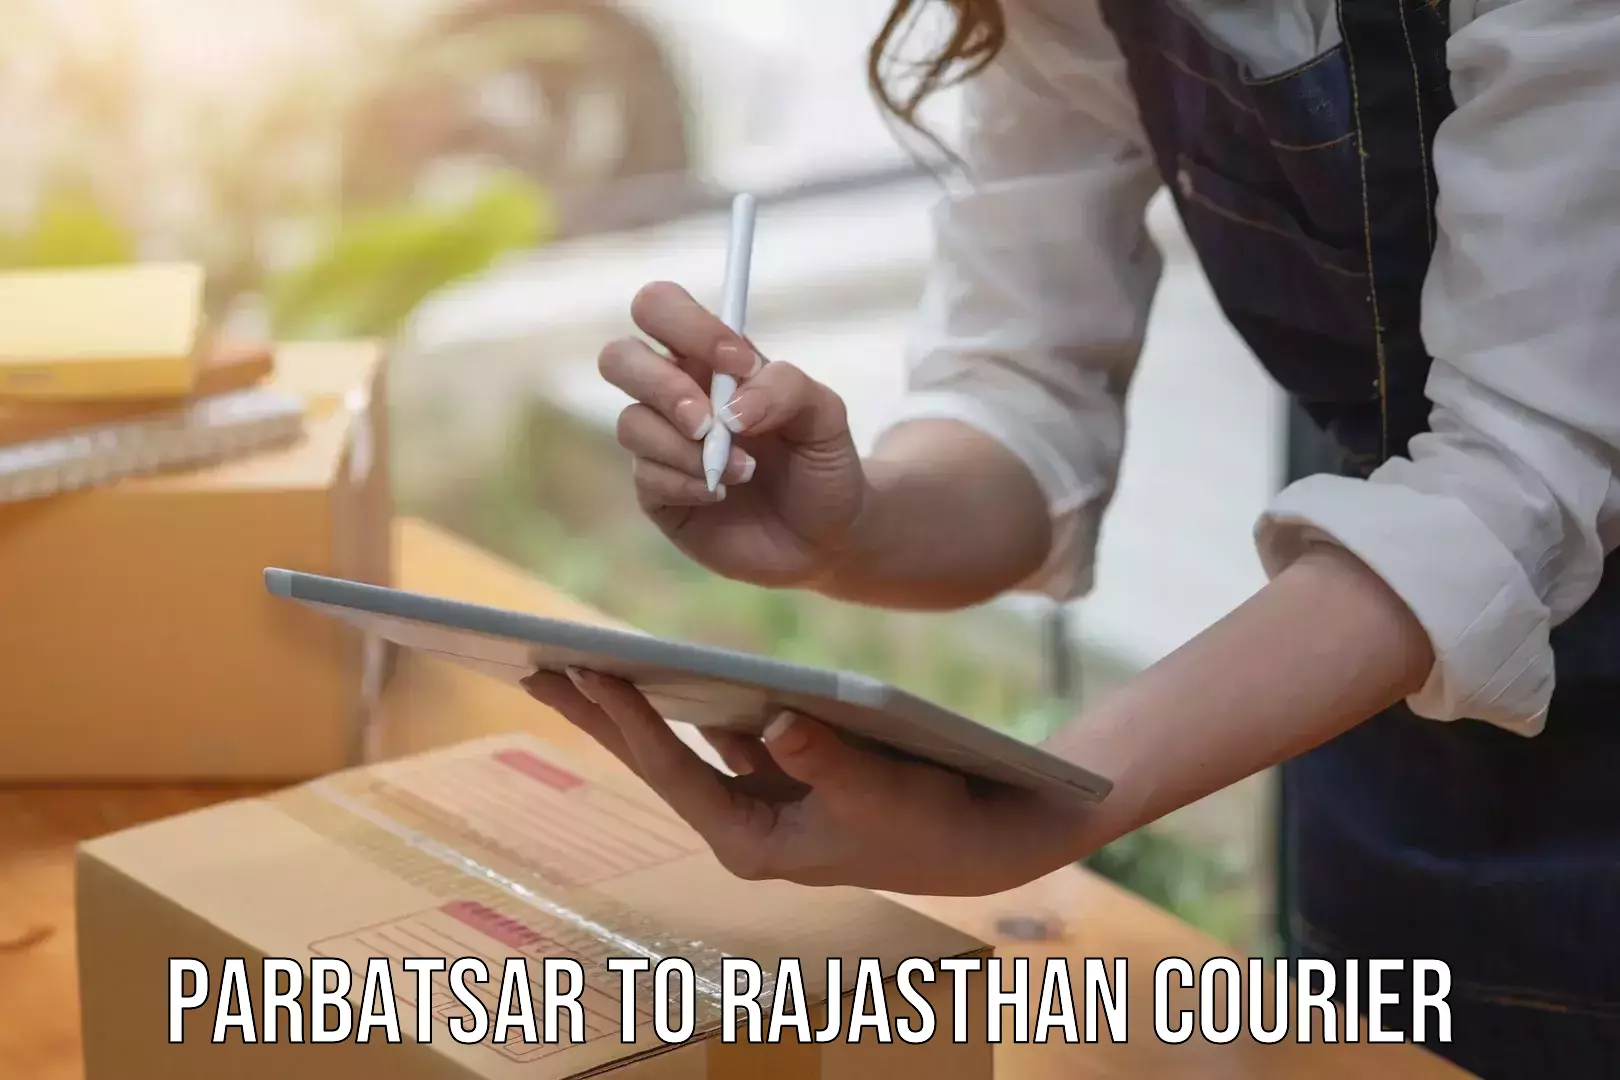 Customizable delivery plans Parbatsar to Jalore